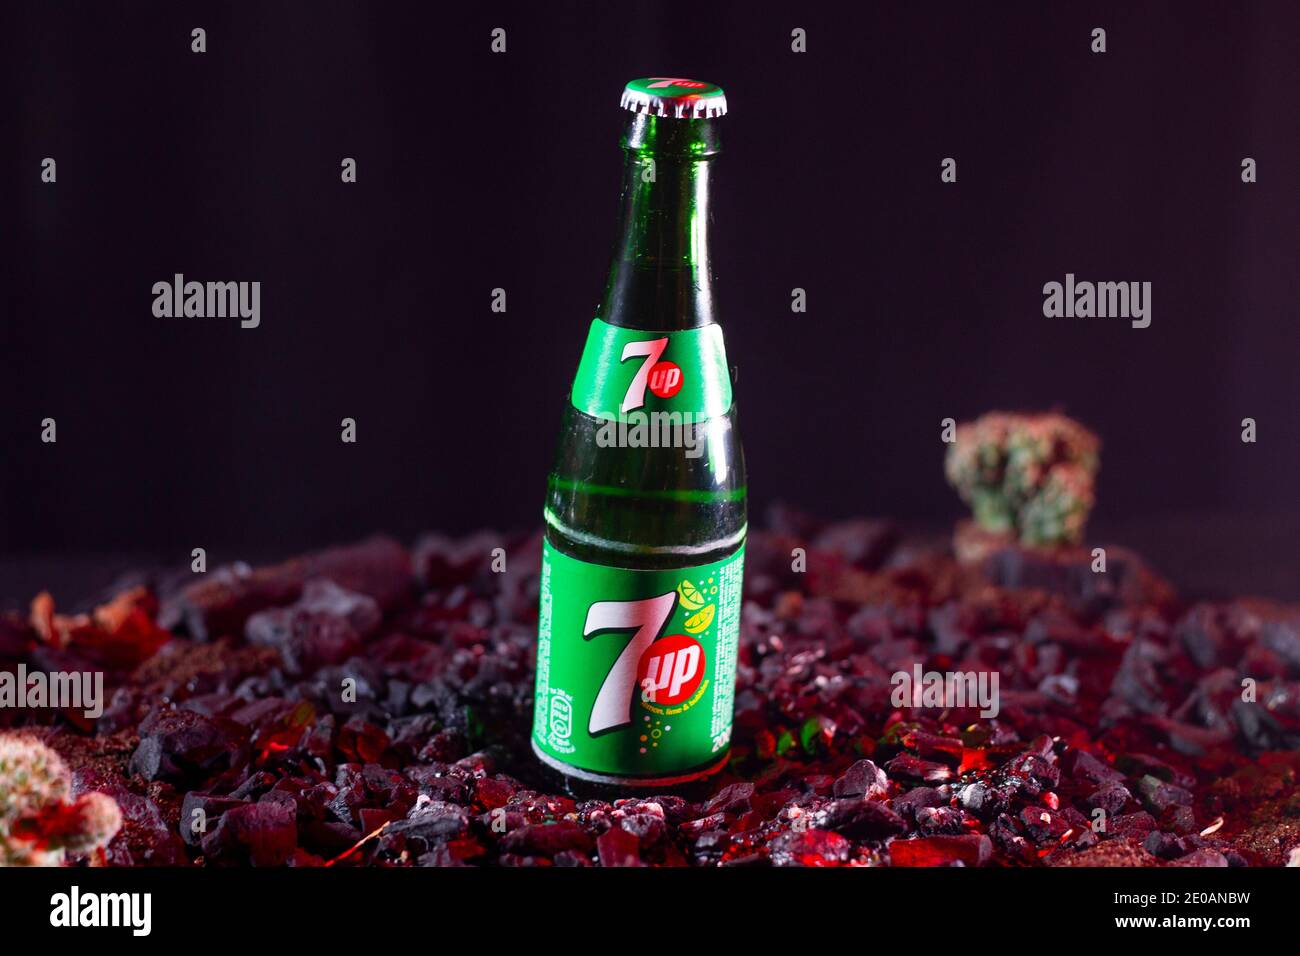 Coruna-Spain. Seven up soda bottle on dark wood shavings and cactus out of focus in the background on March 26, 2019 Stock Photo